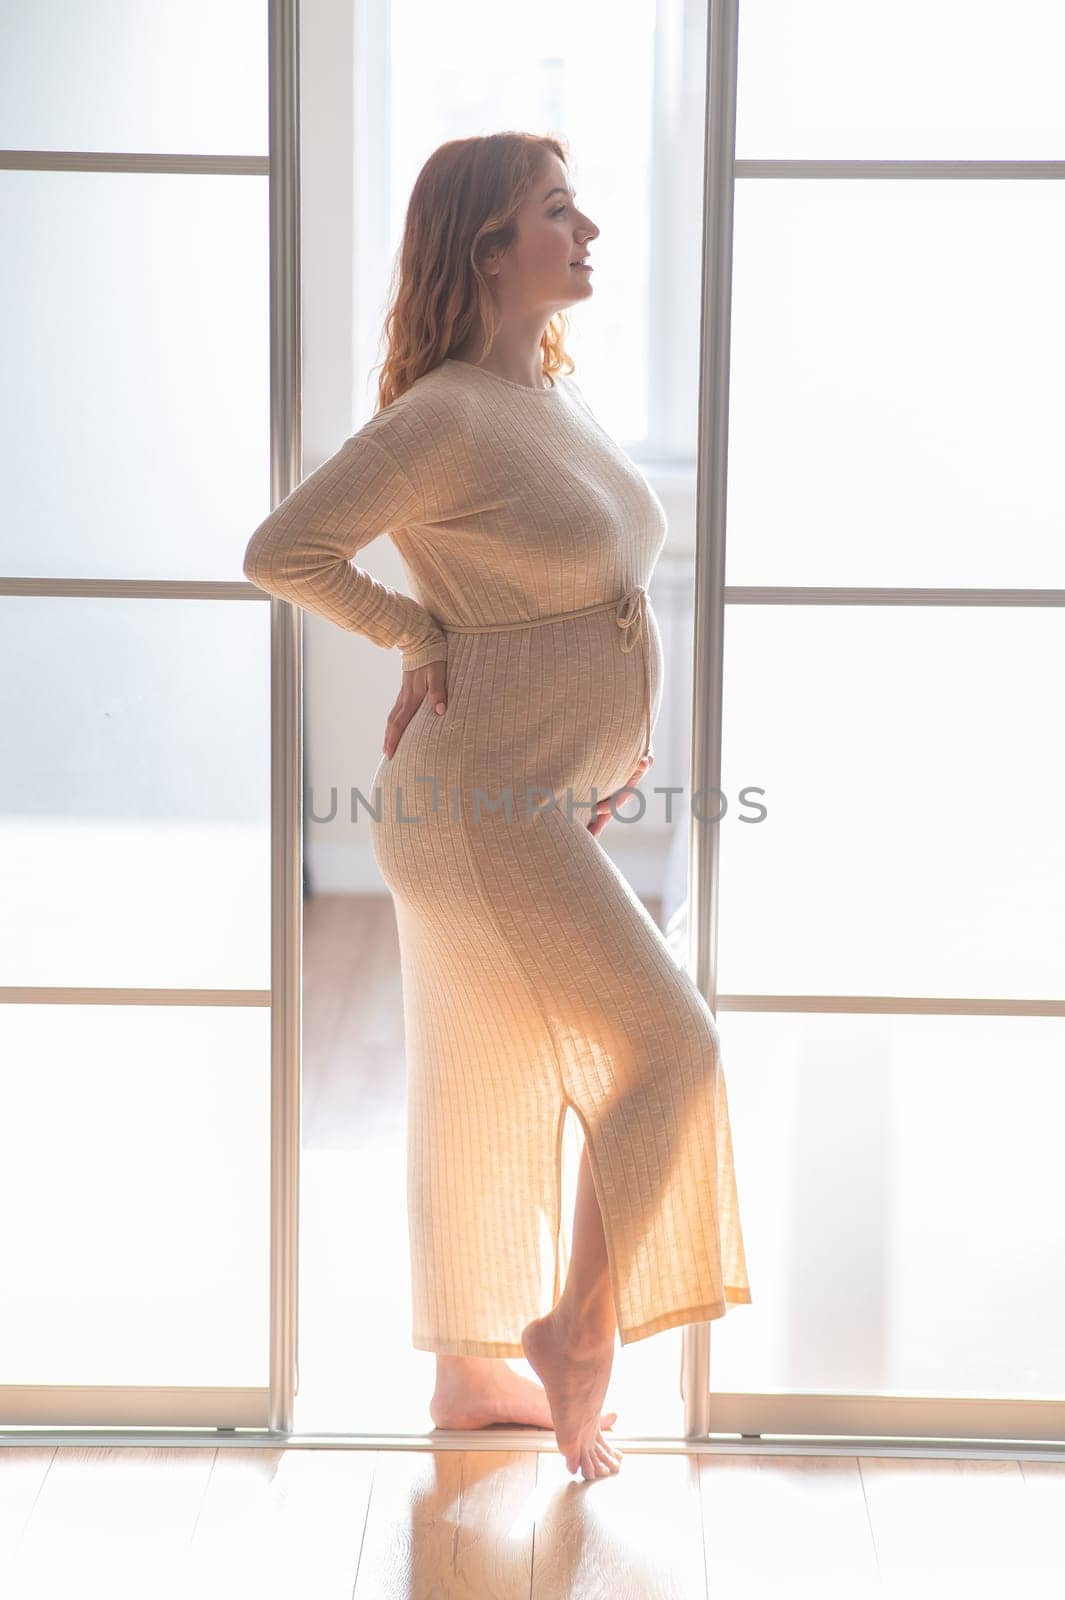 A pregnant woman in a long beige dress stands in profile between the folding doors. by mrwed54